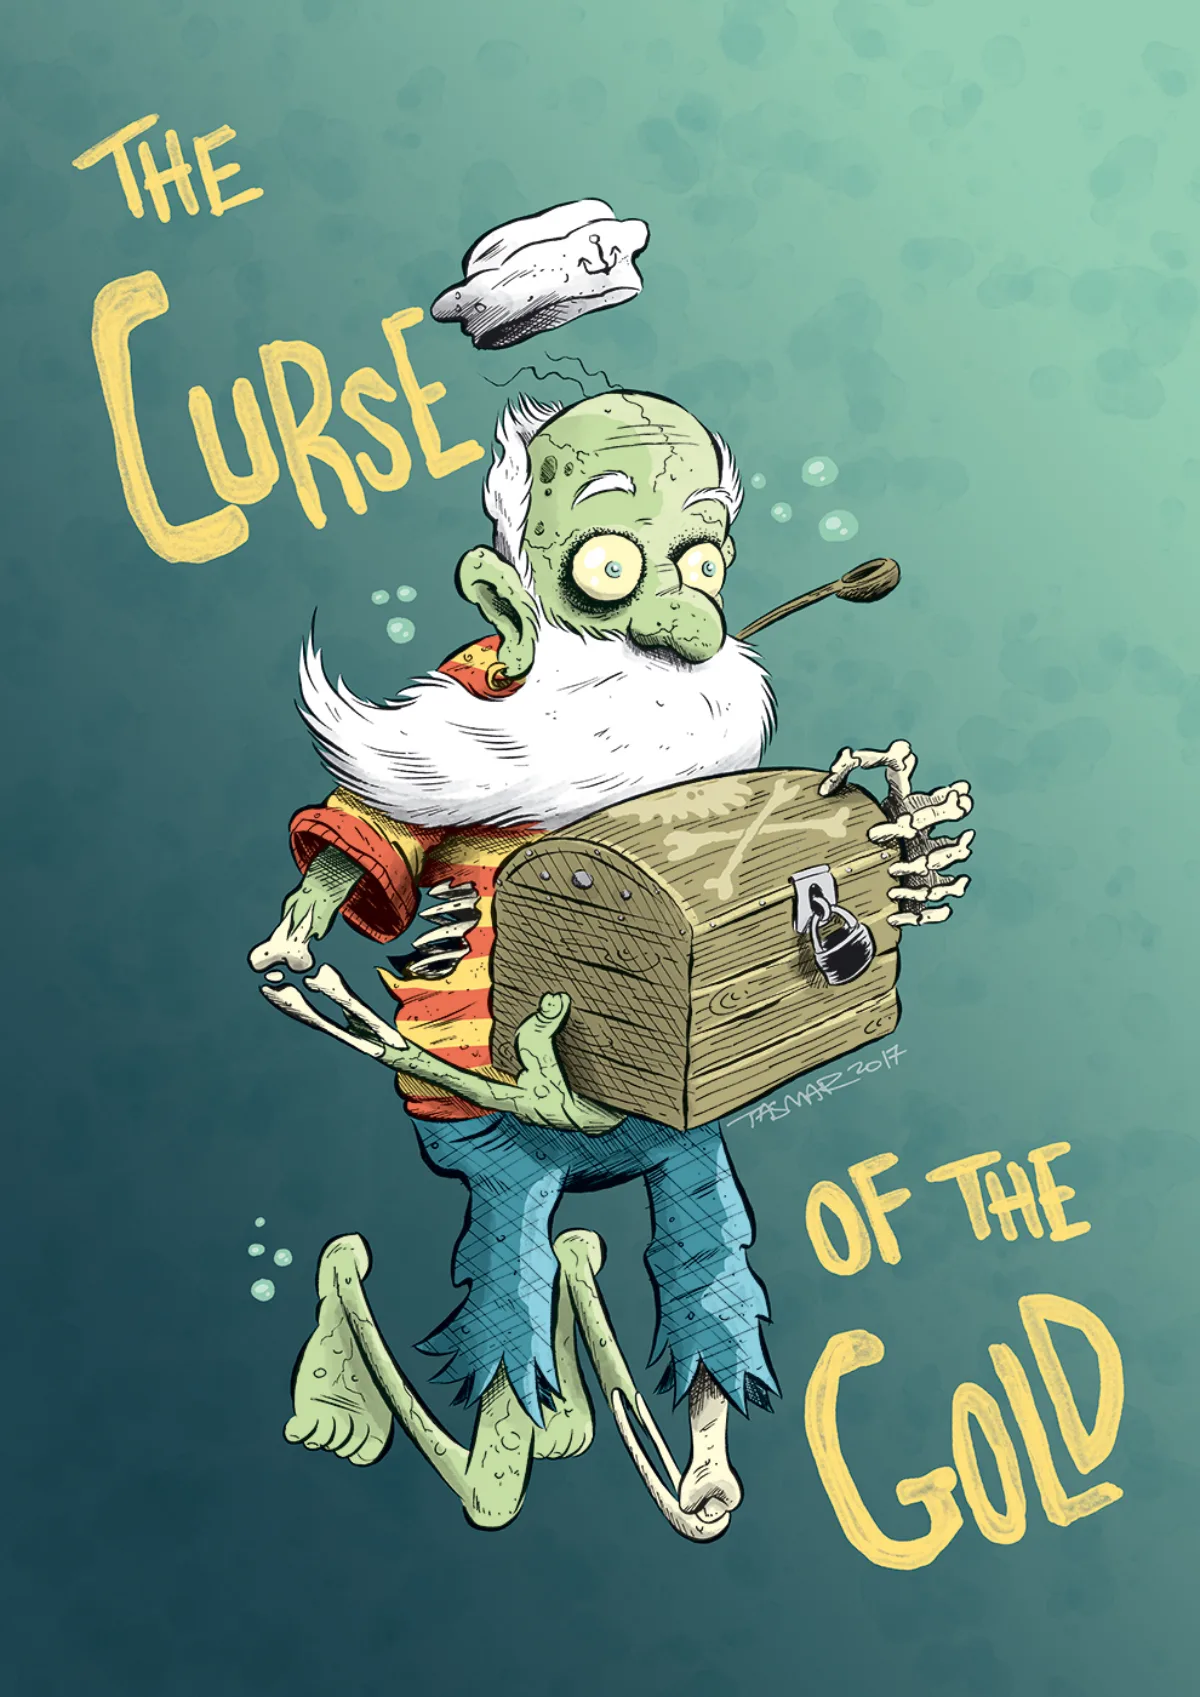 The Curse of the Gold